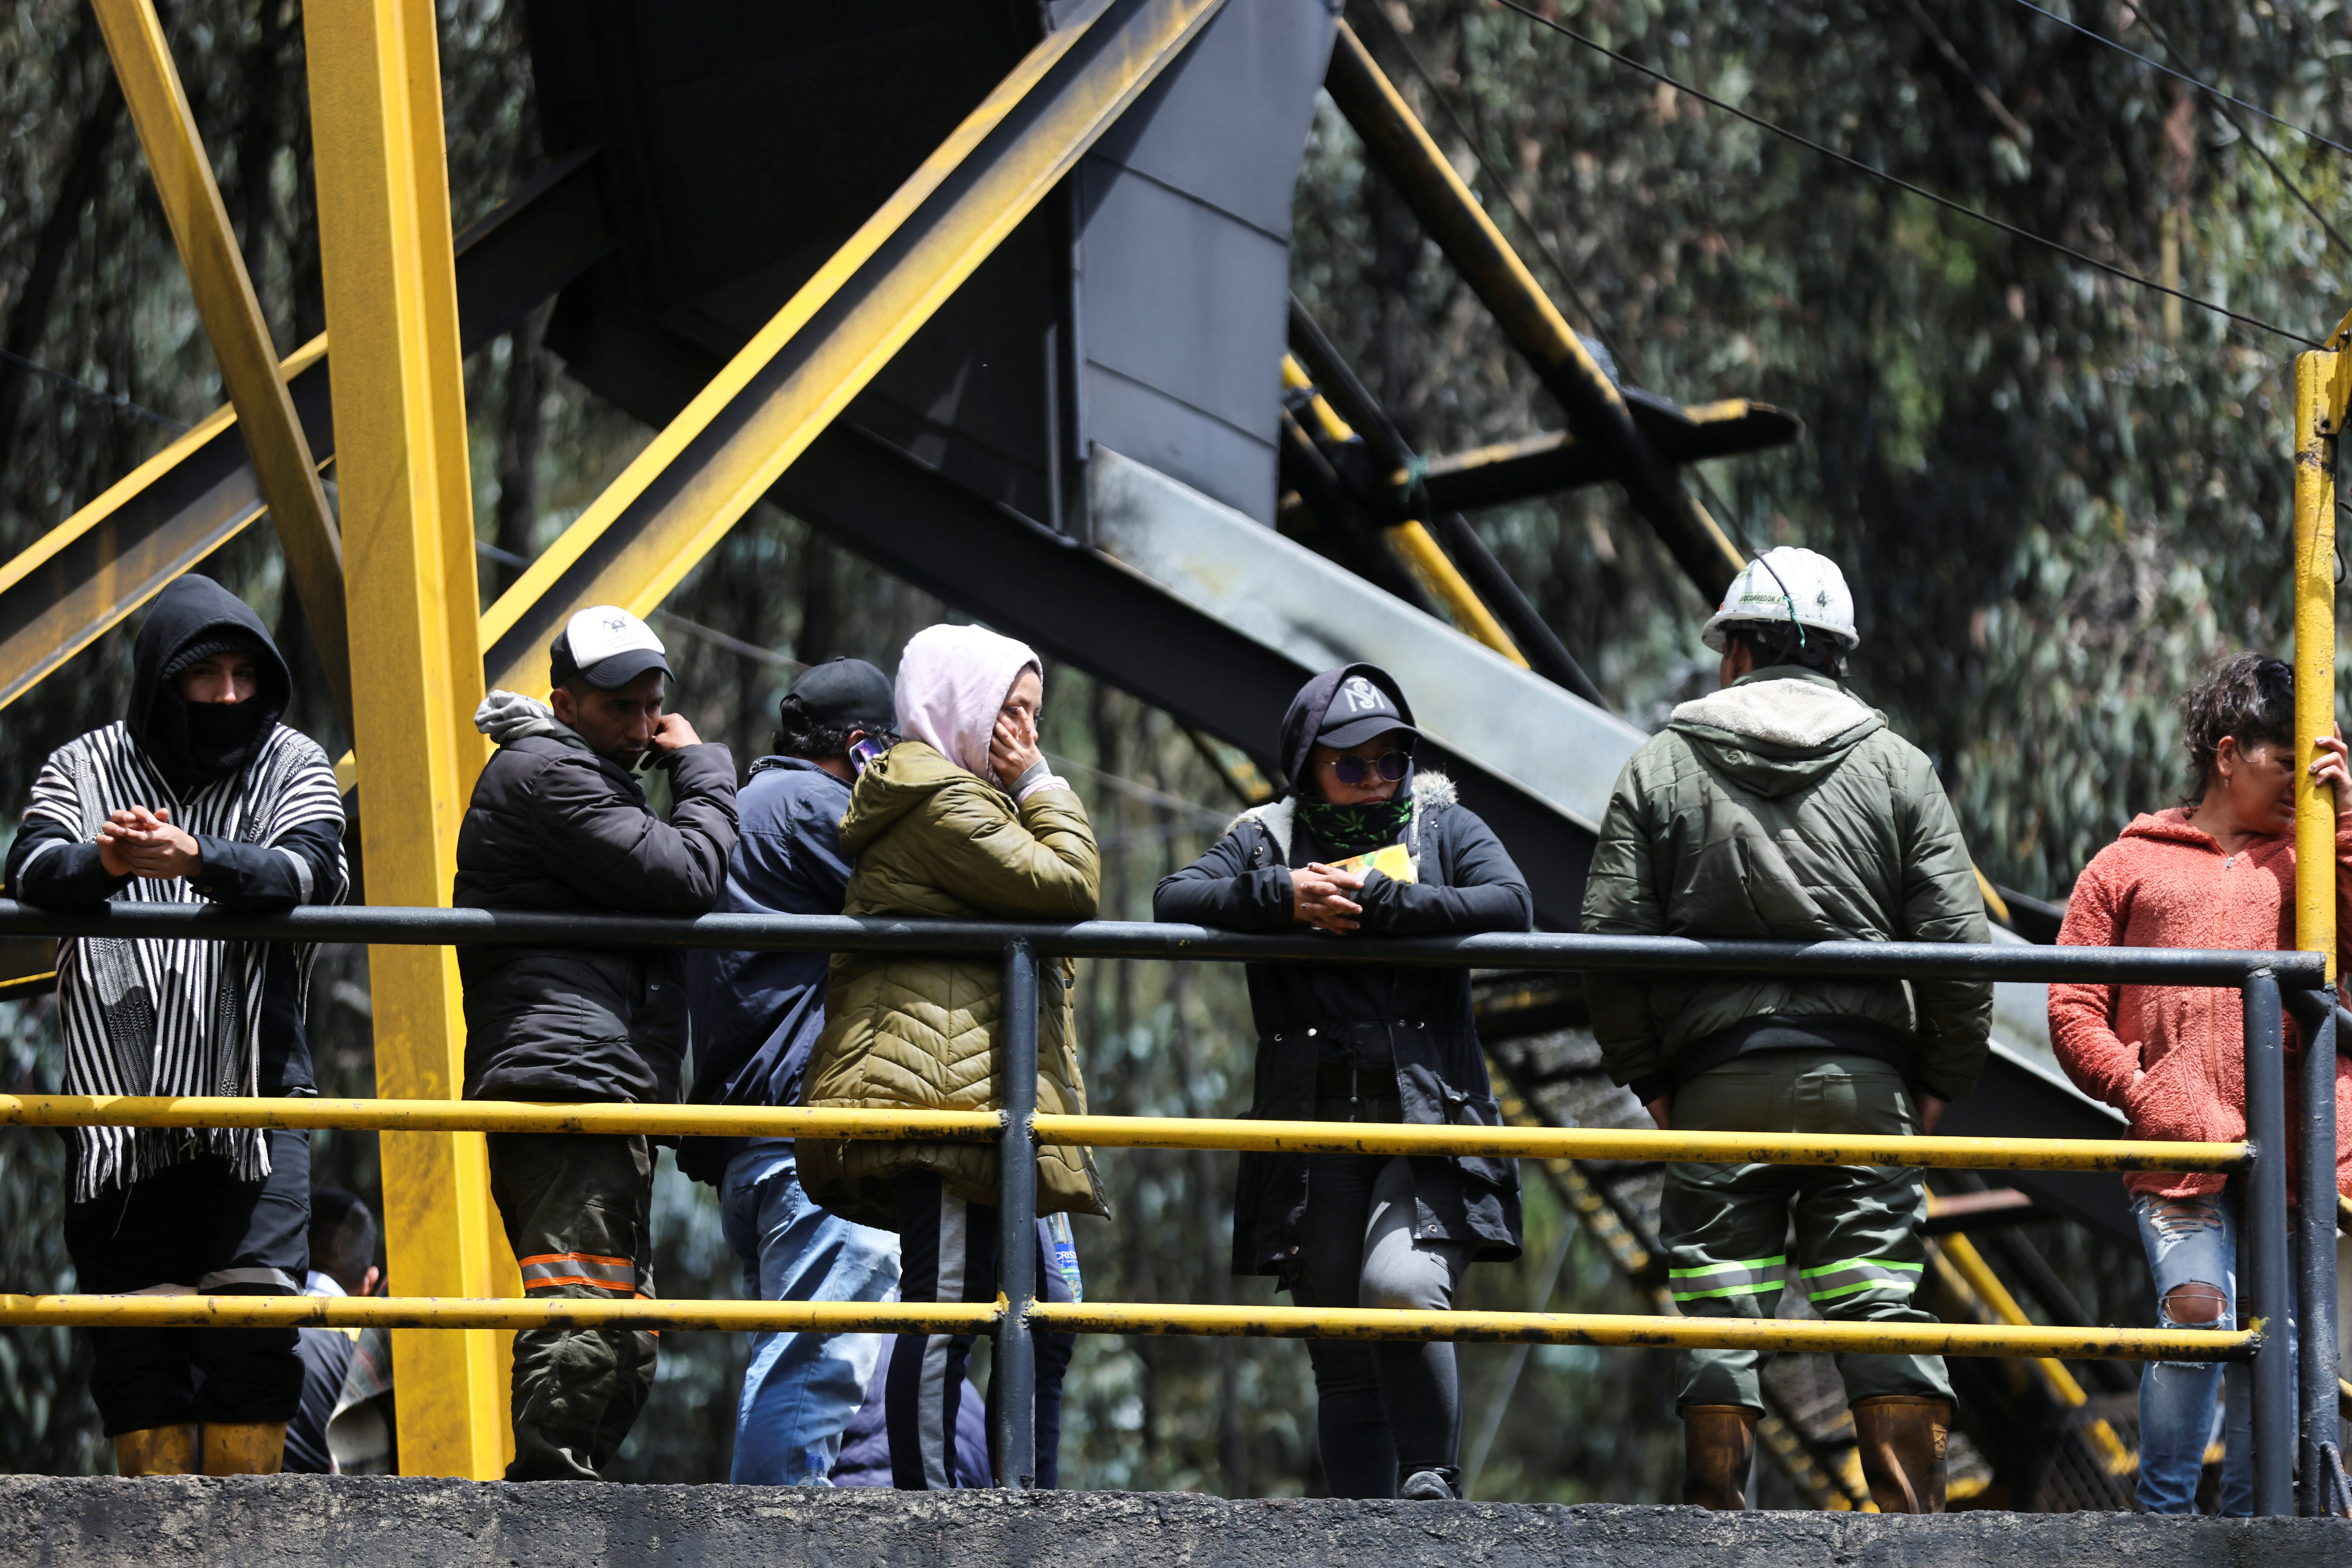 Search and rescue work for miners trapped following an explosion in a coal mine in Sutatausa